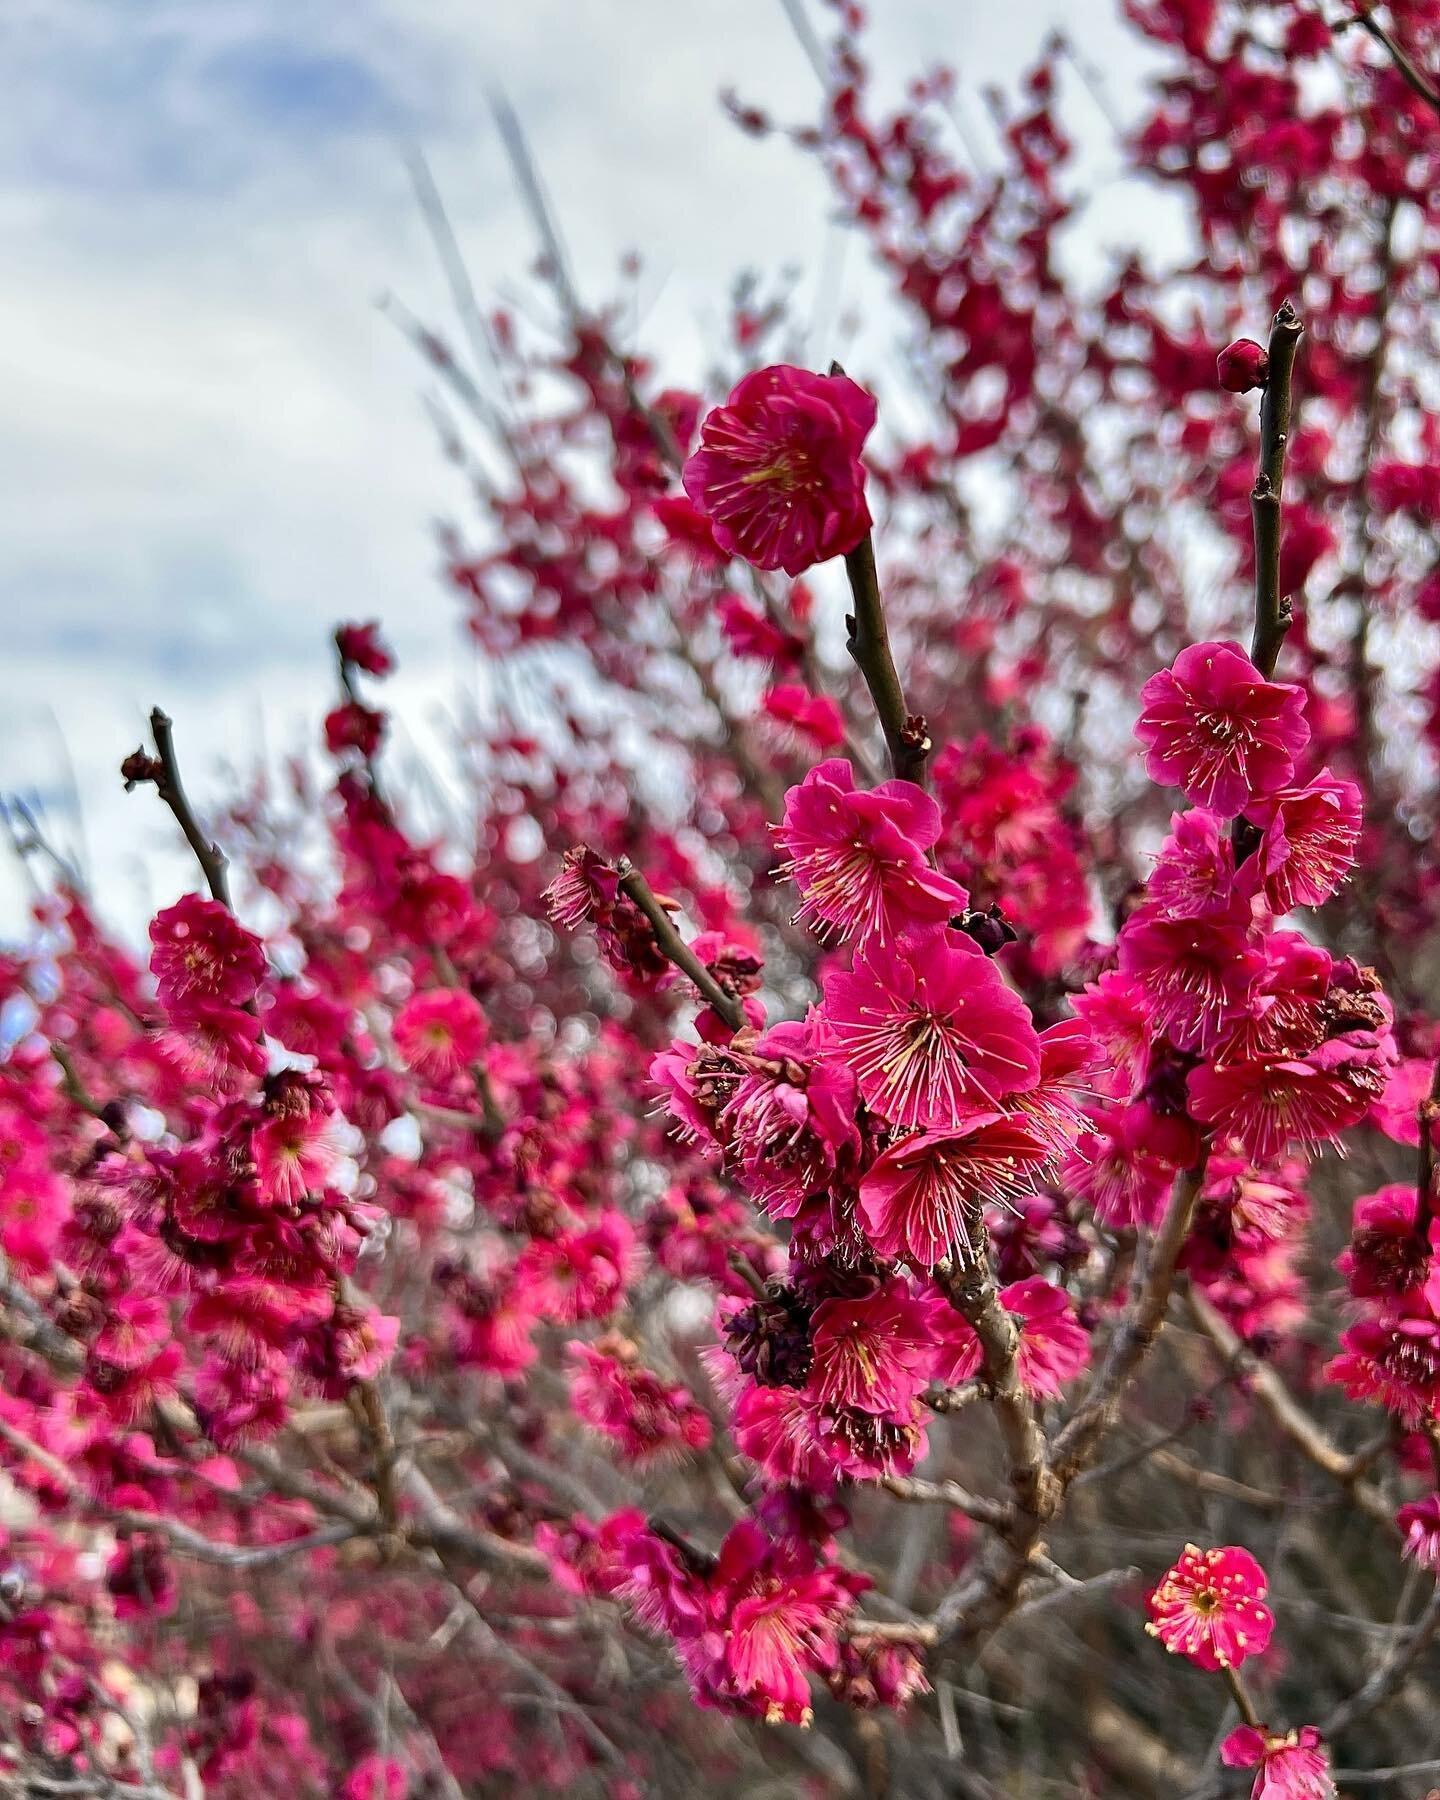 The Japanese Apricots in bloom at the @usbotanicgarden deliver the hope of spring a few weeks before the others. #apricots #trees #blossom #spring #washingtondc #cherryblossom #spring #flowers #nature